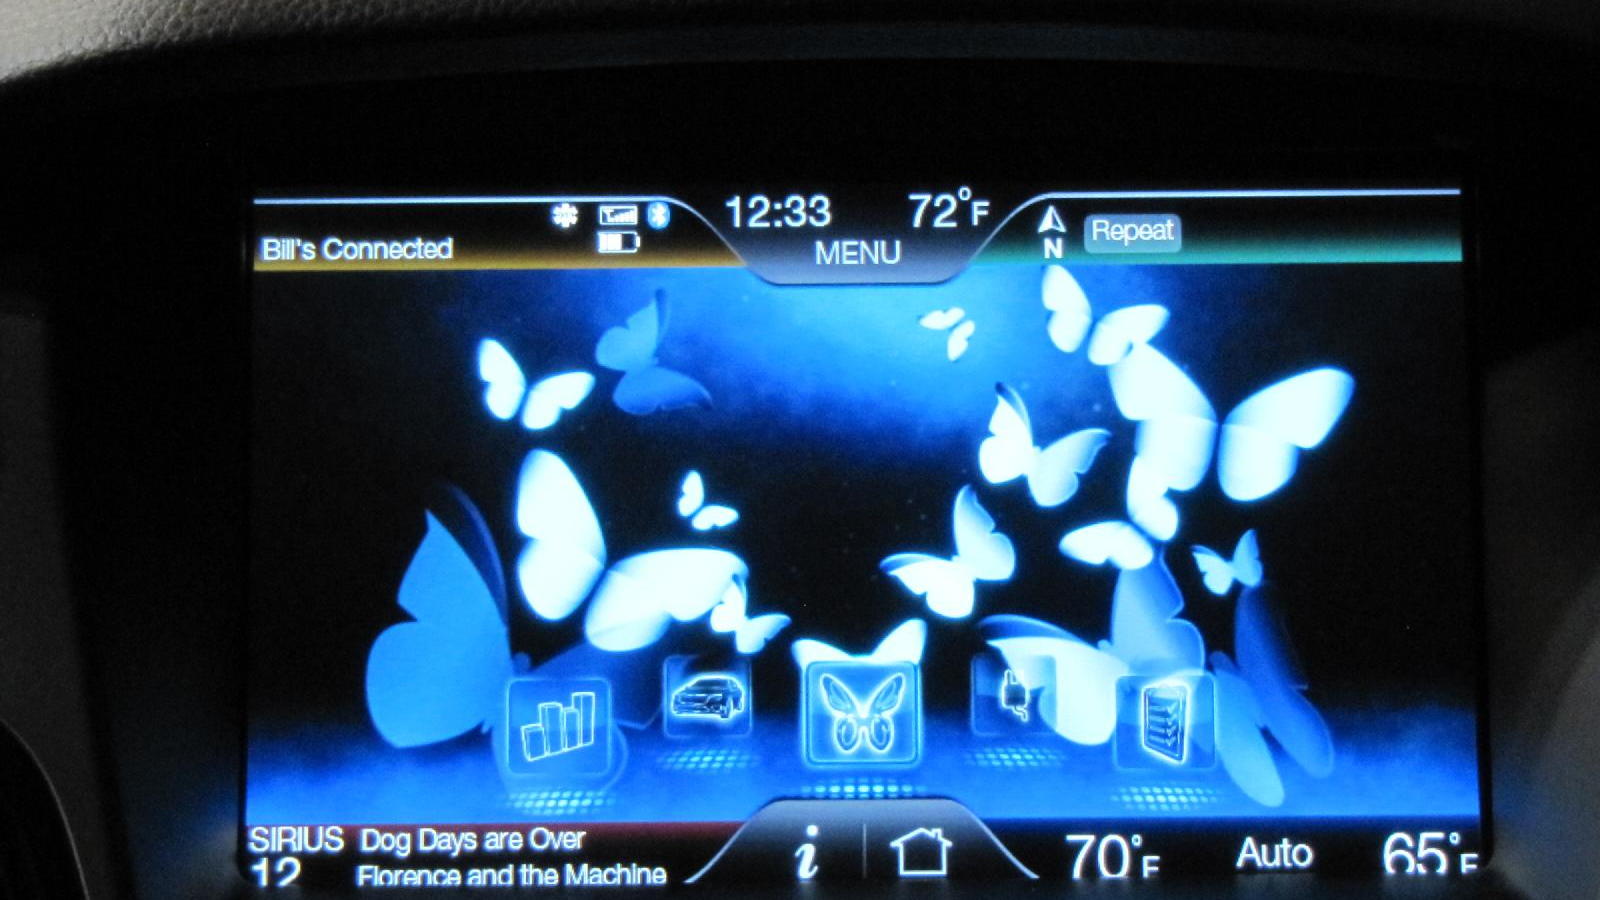 2012 Ford Focus Electric launch, New York City, January 2011 - butterflies on dash display